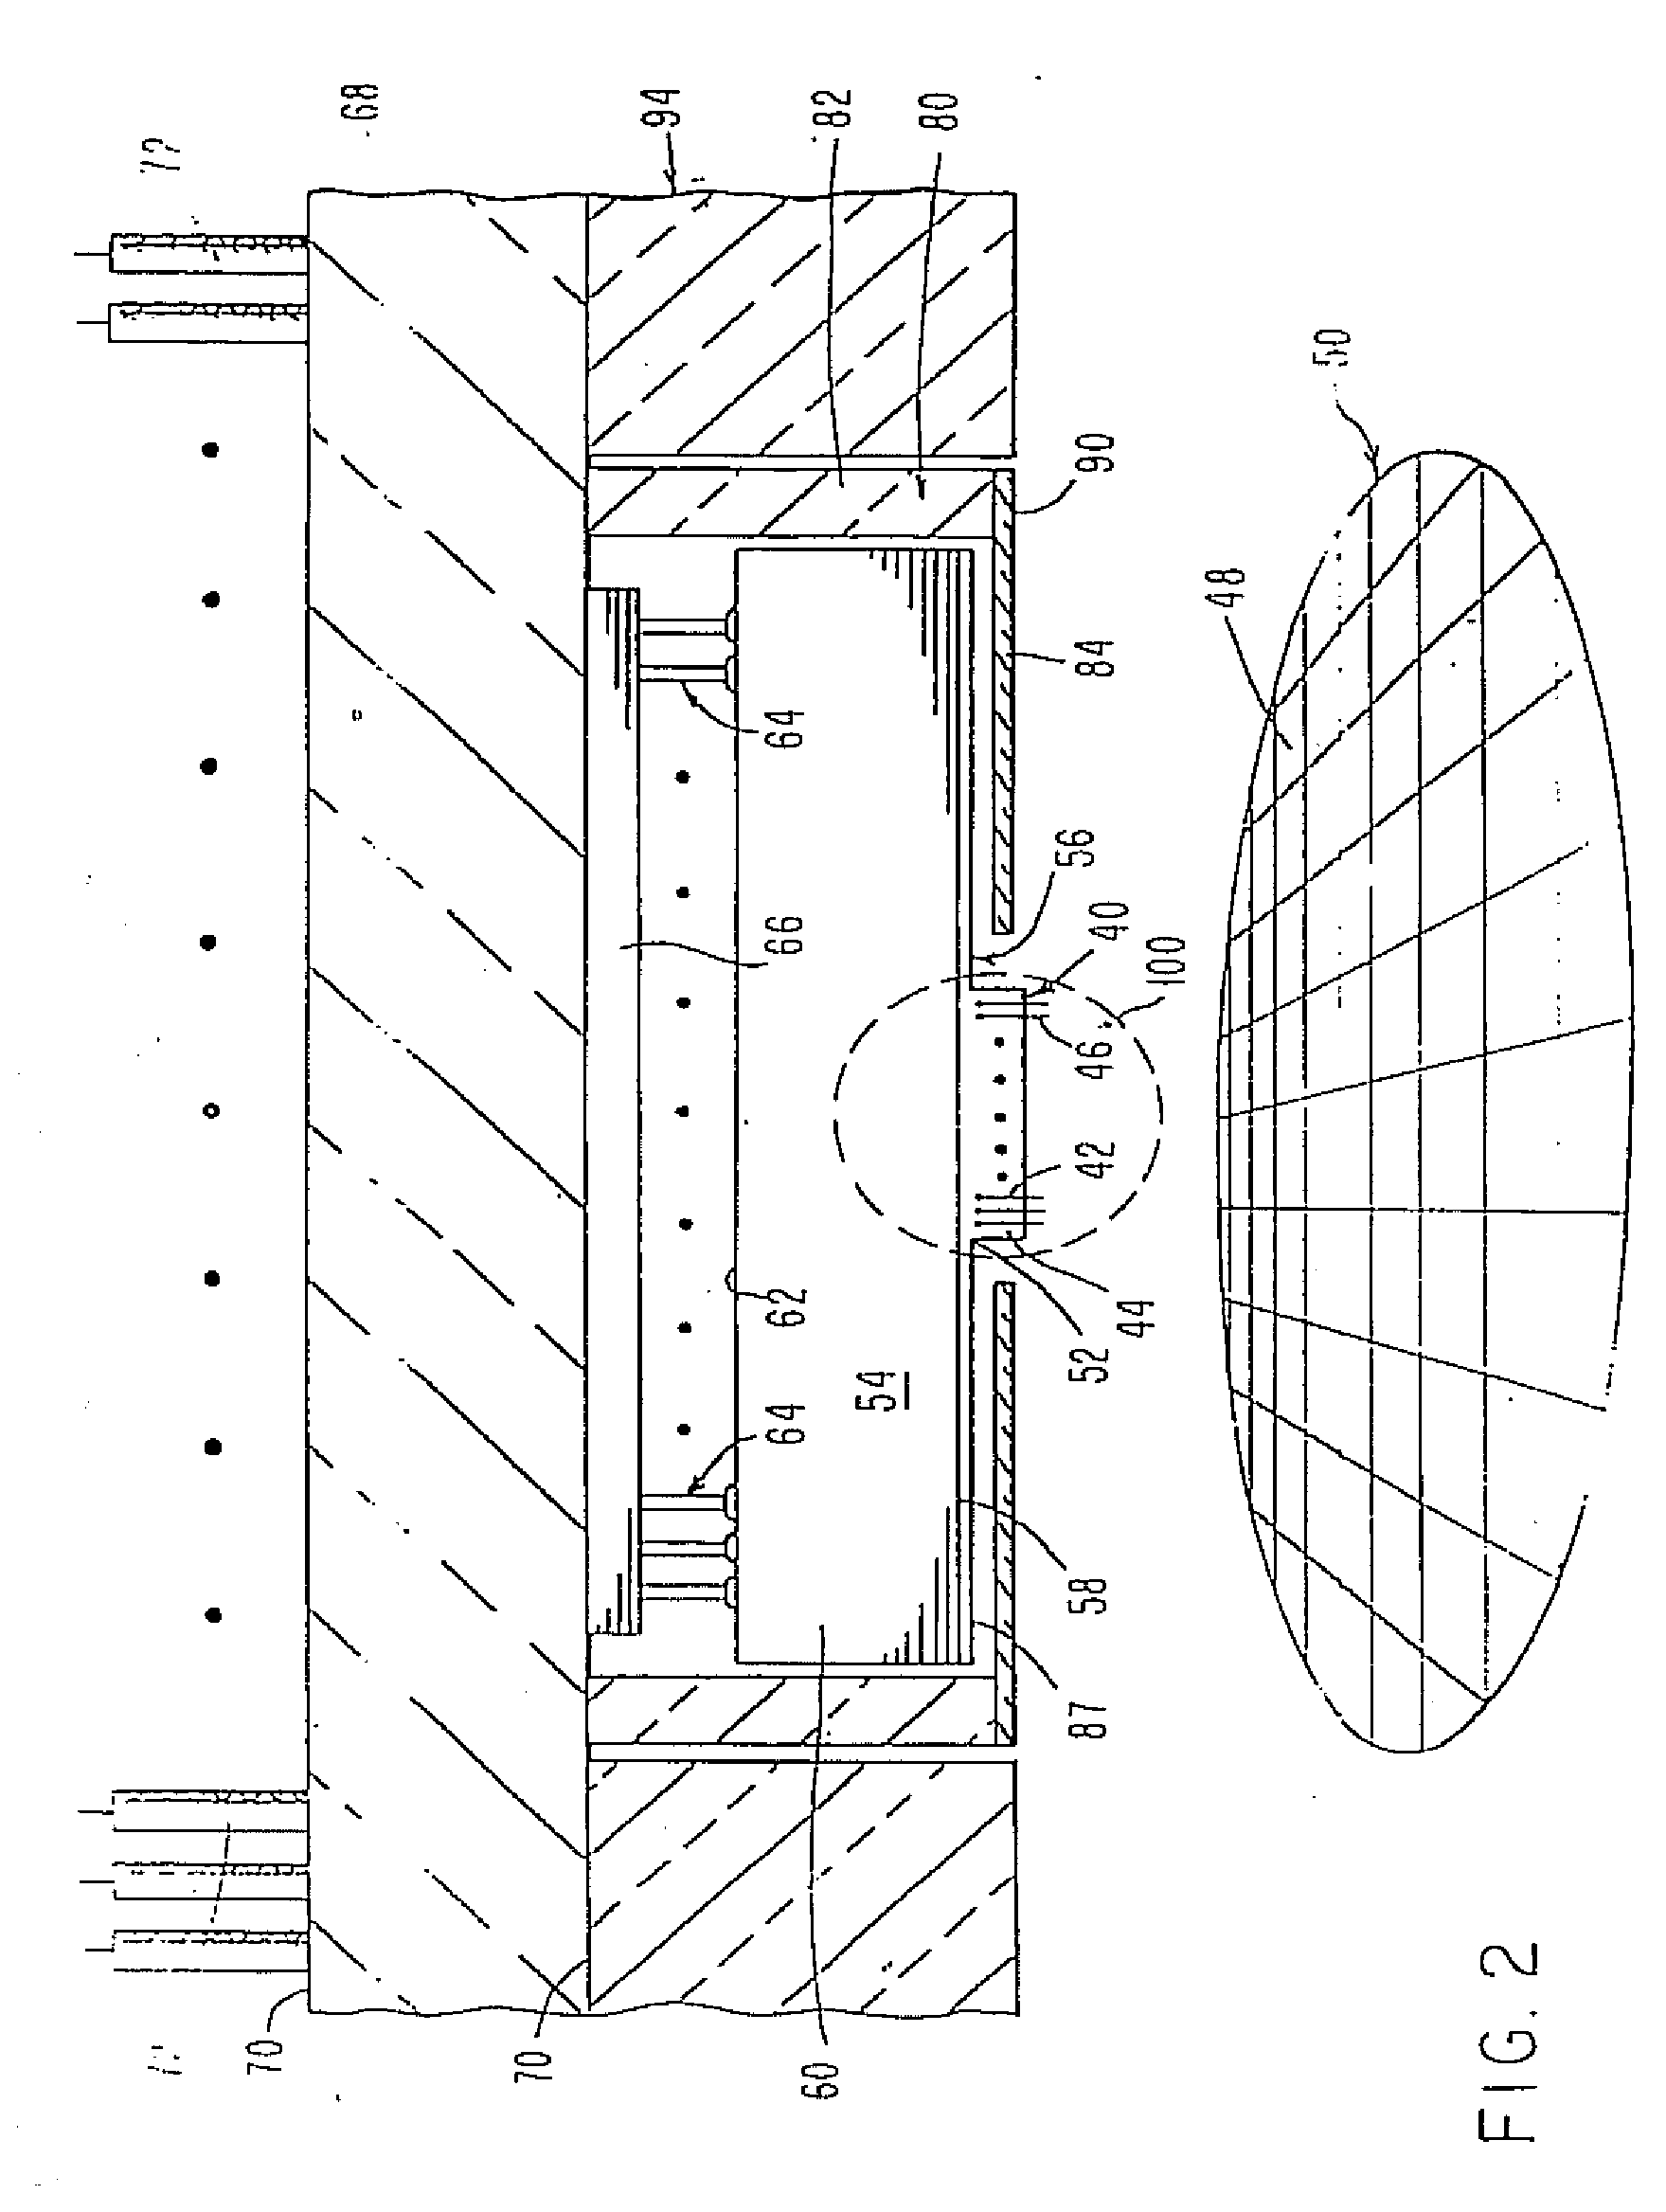 High density integrated circuit apparatus, test probe and methods of use thereof